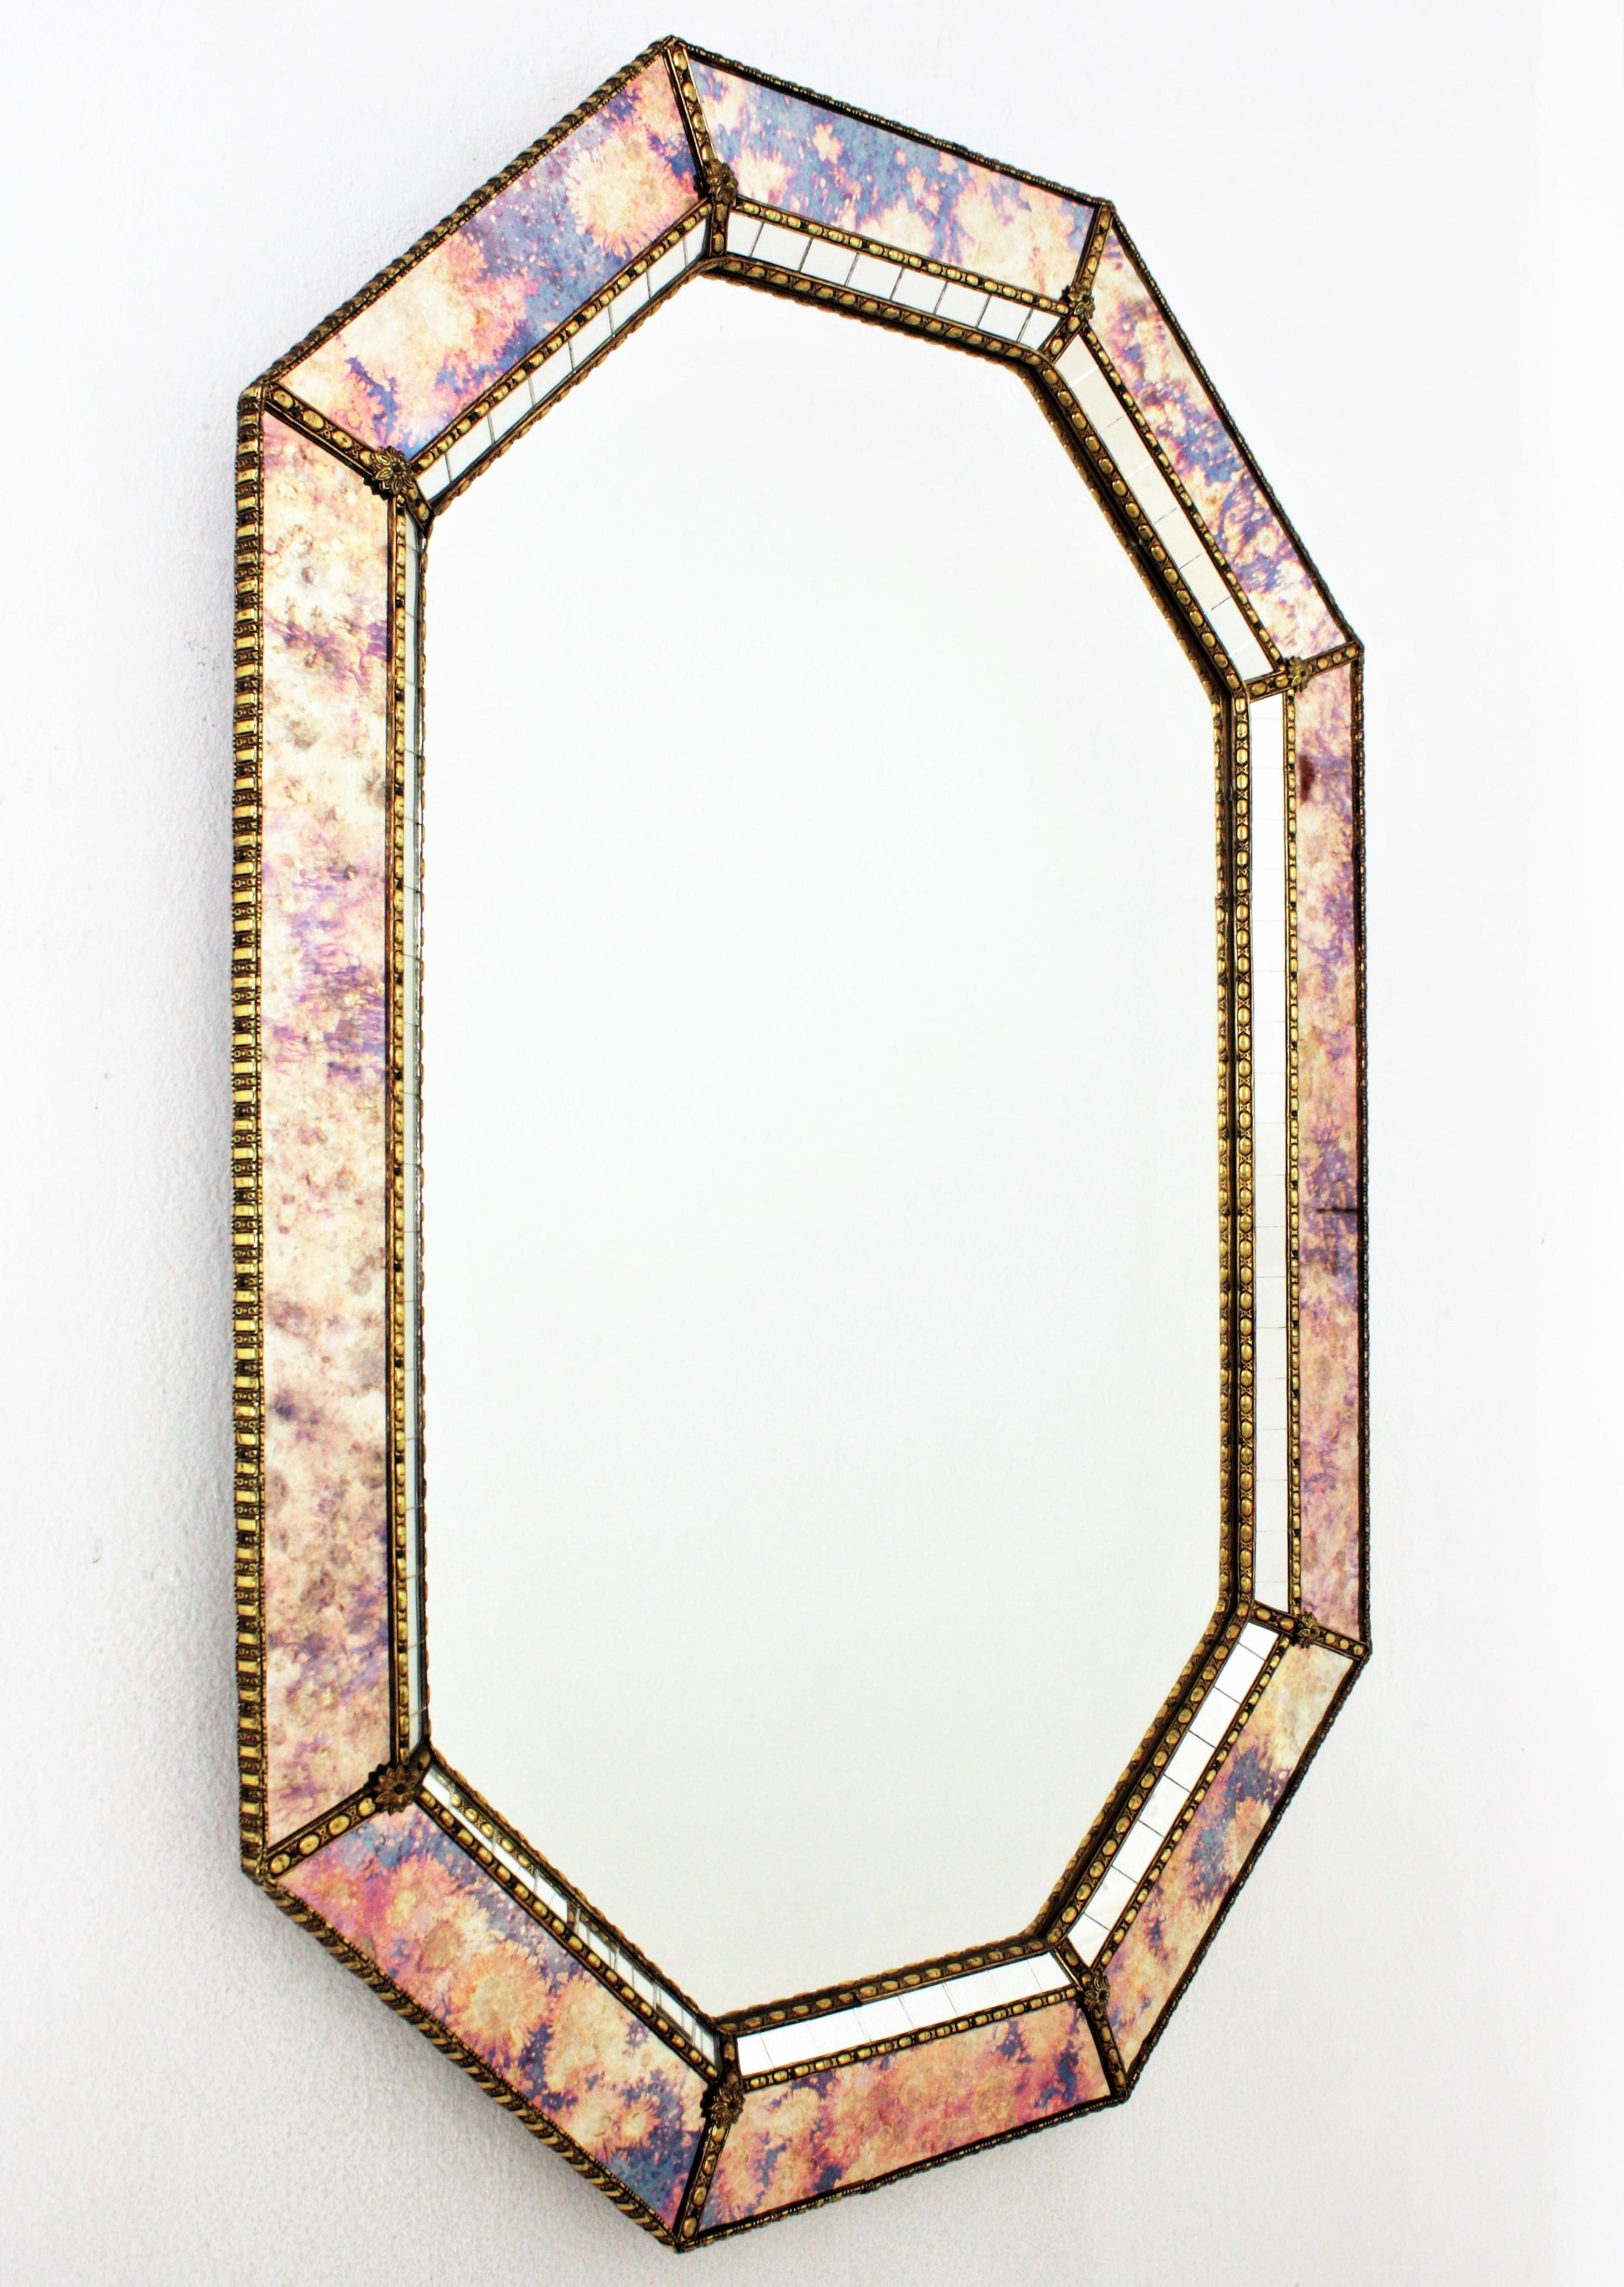 Hollywood Regency Octagonal Venetian Style Mirror with Iridiscent Pink Purple Glass & Brass Detail For Sale